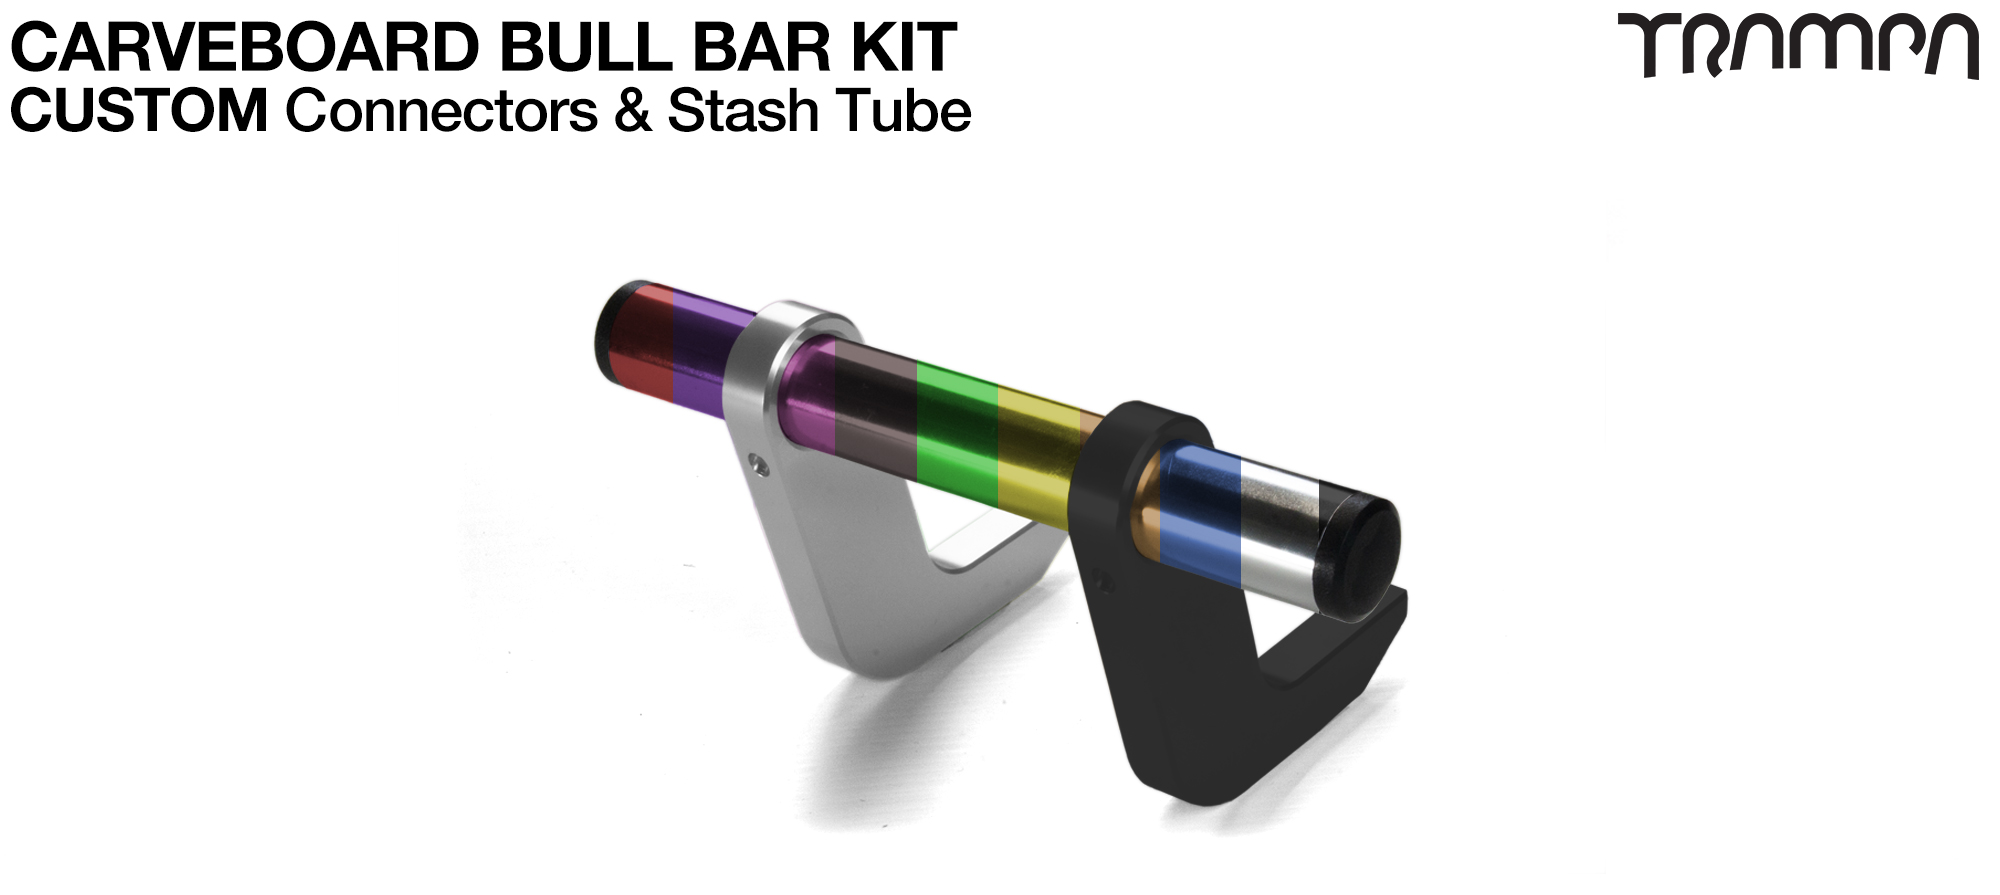 BULL BARS for CARVE BOARDS T6 Heat Treated CNC'd Aluminium Uprights, with Hollow Aluminium Stash Tubes with Rubber end bungs